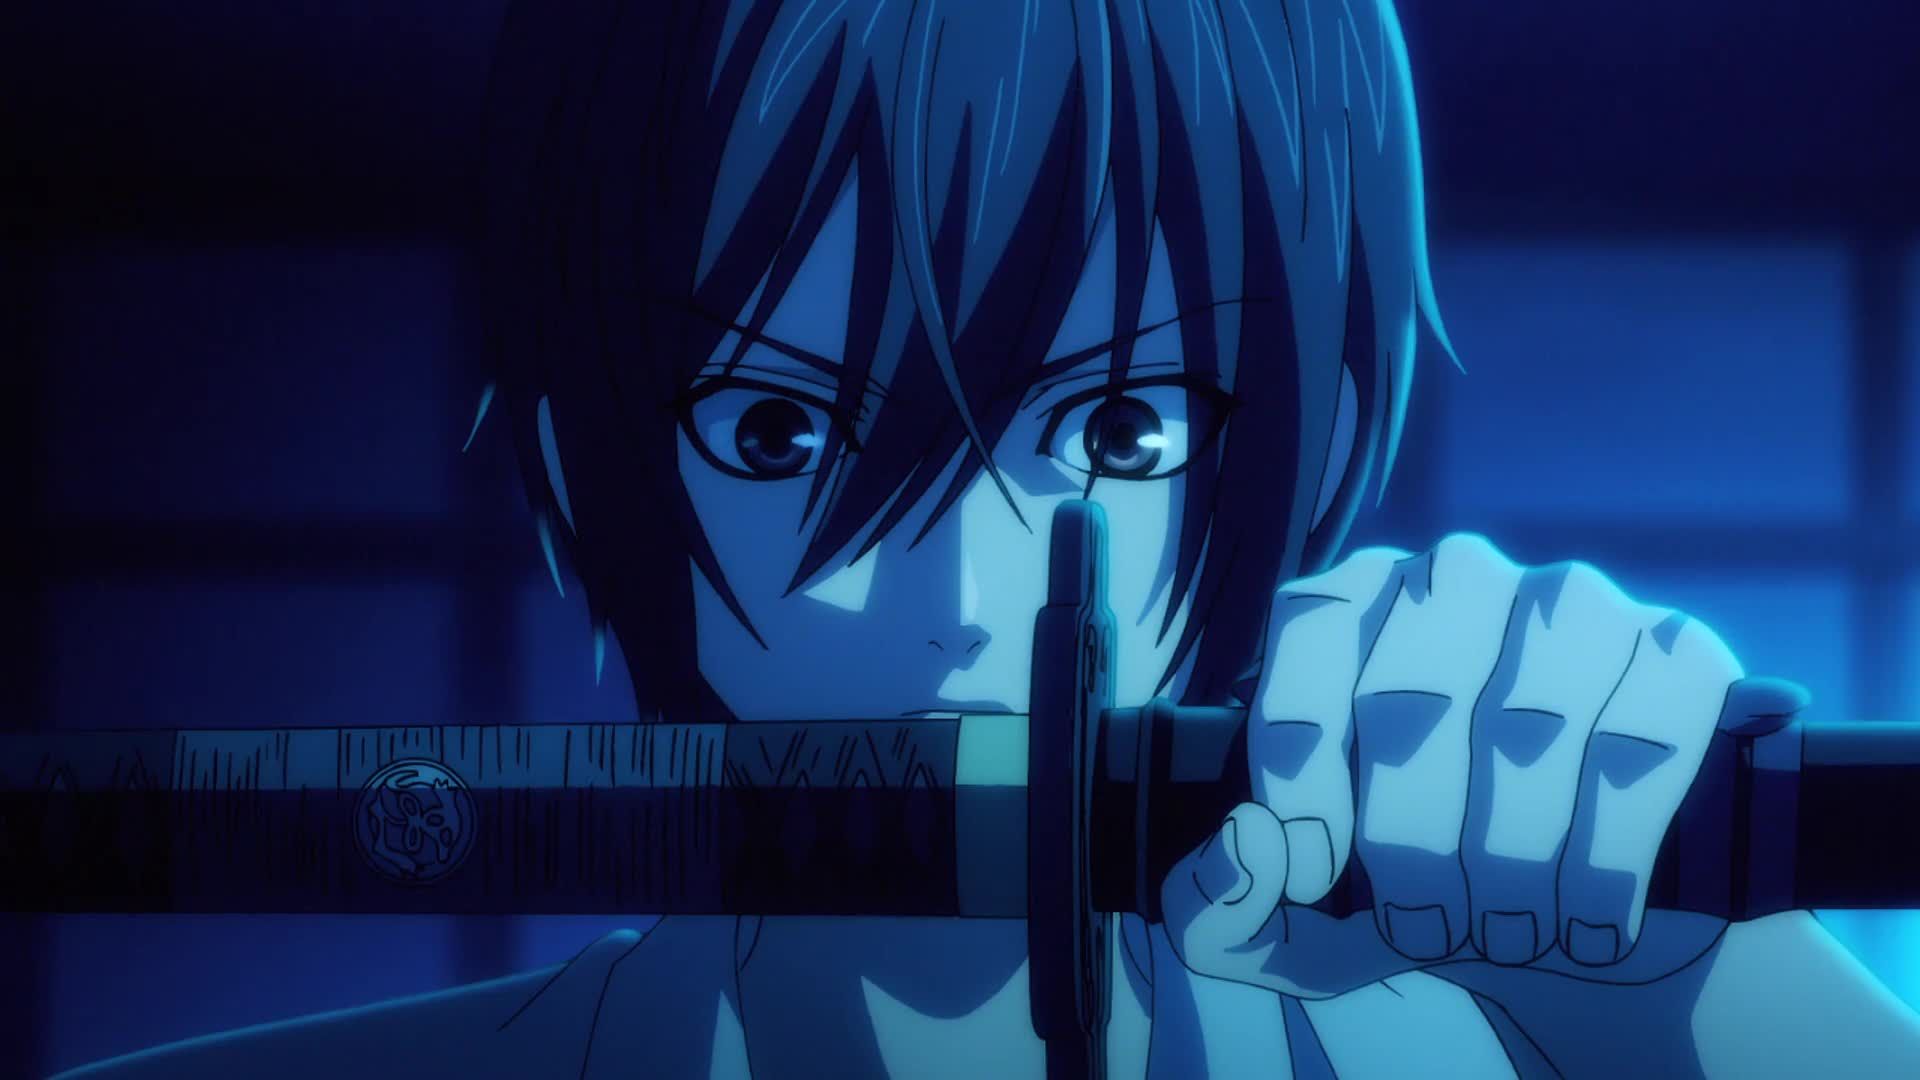 Sword Gai: The Animation background